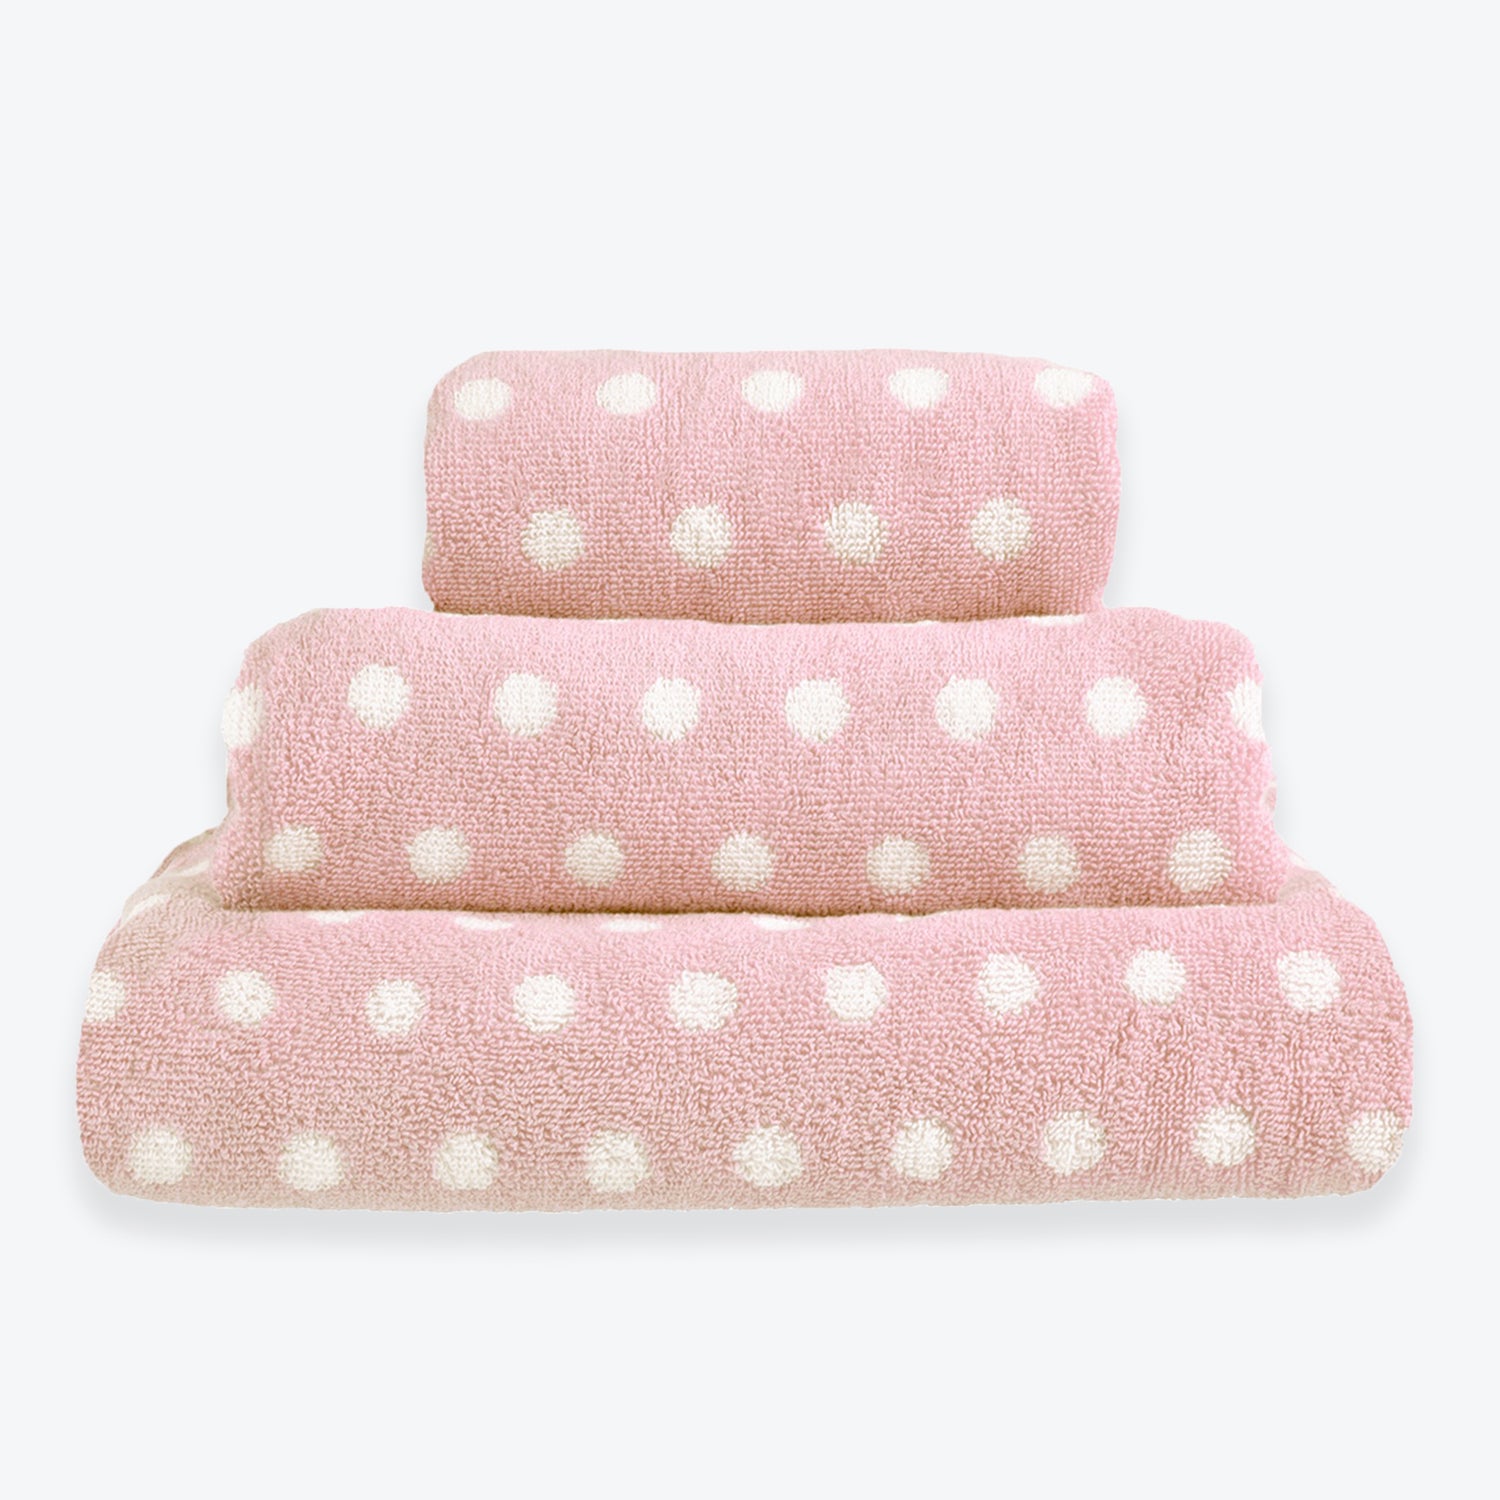 Patterned Bathroom Towels - Pink Spotty Towels